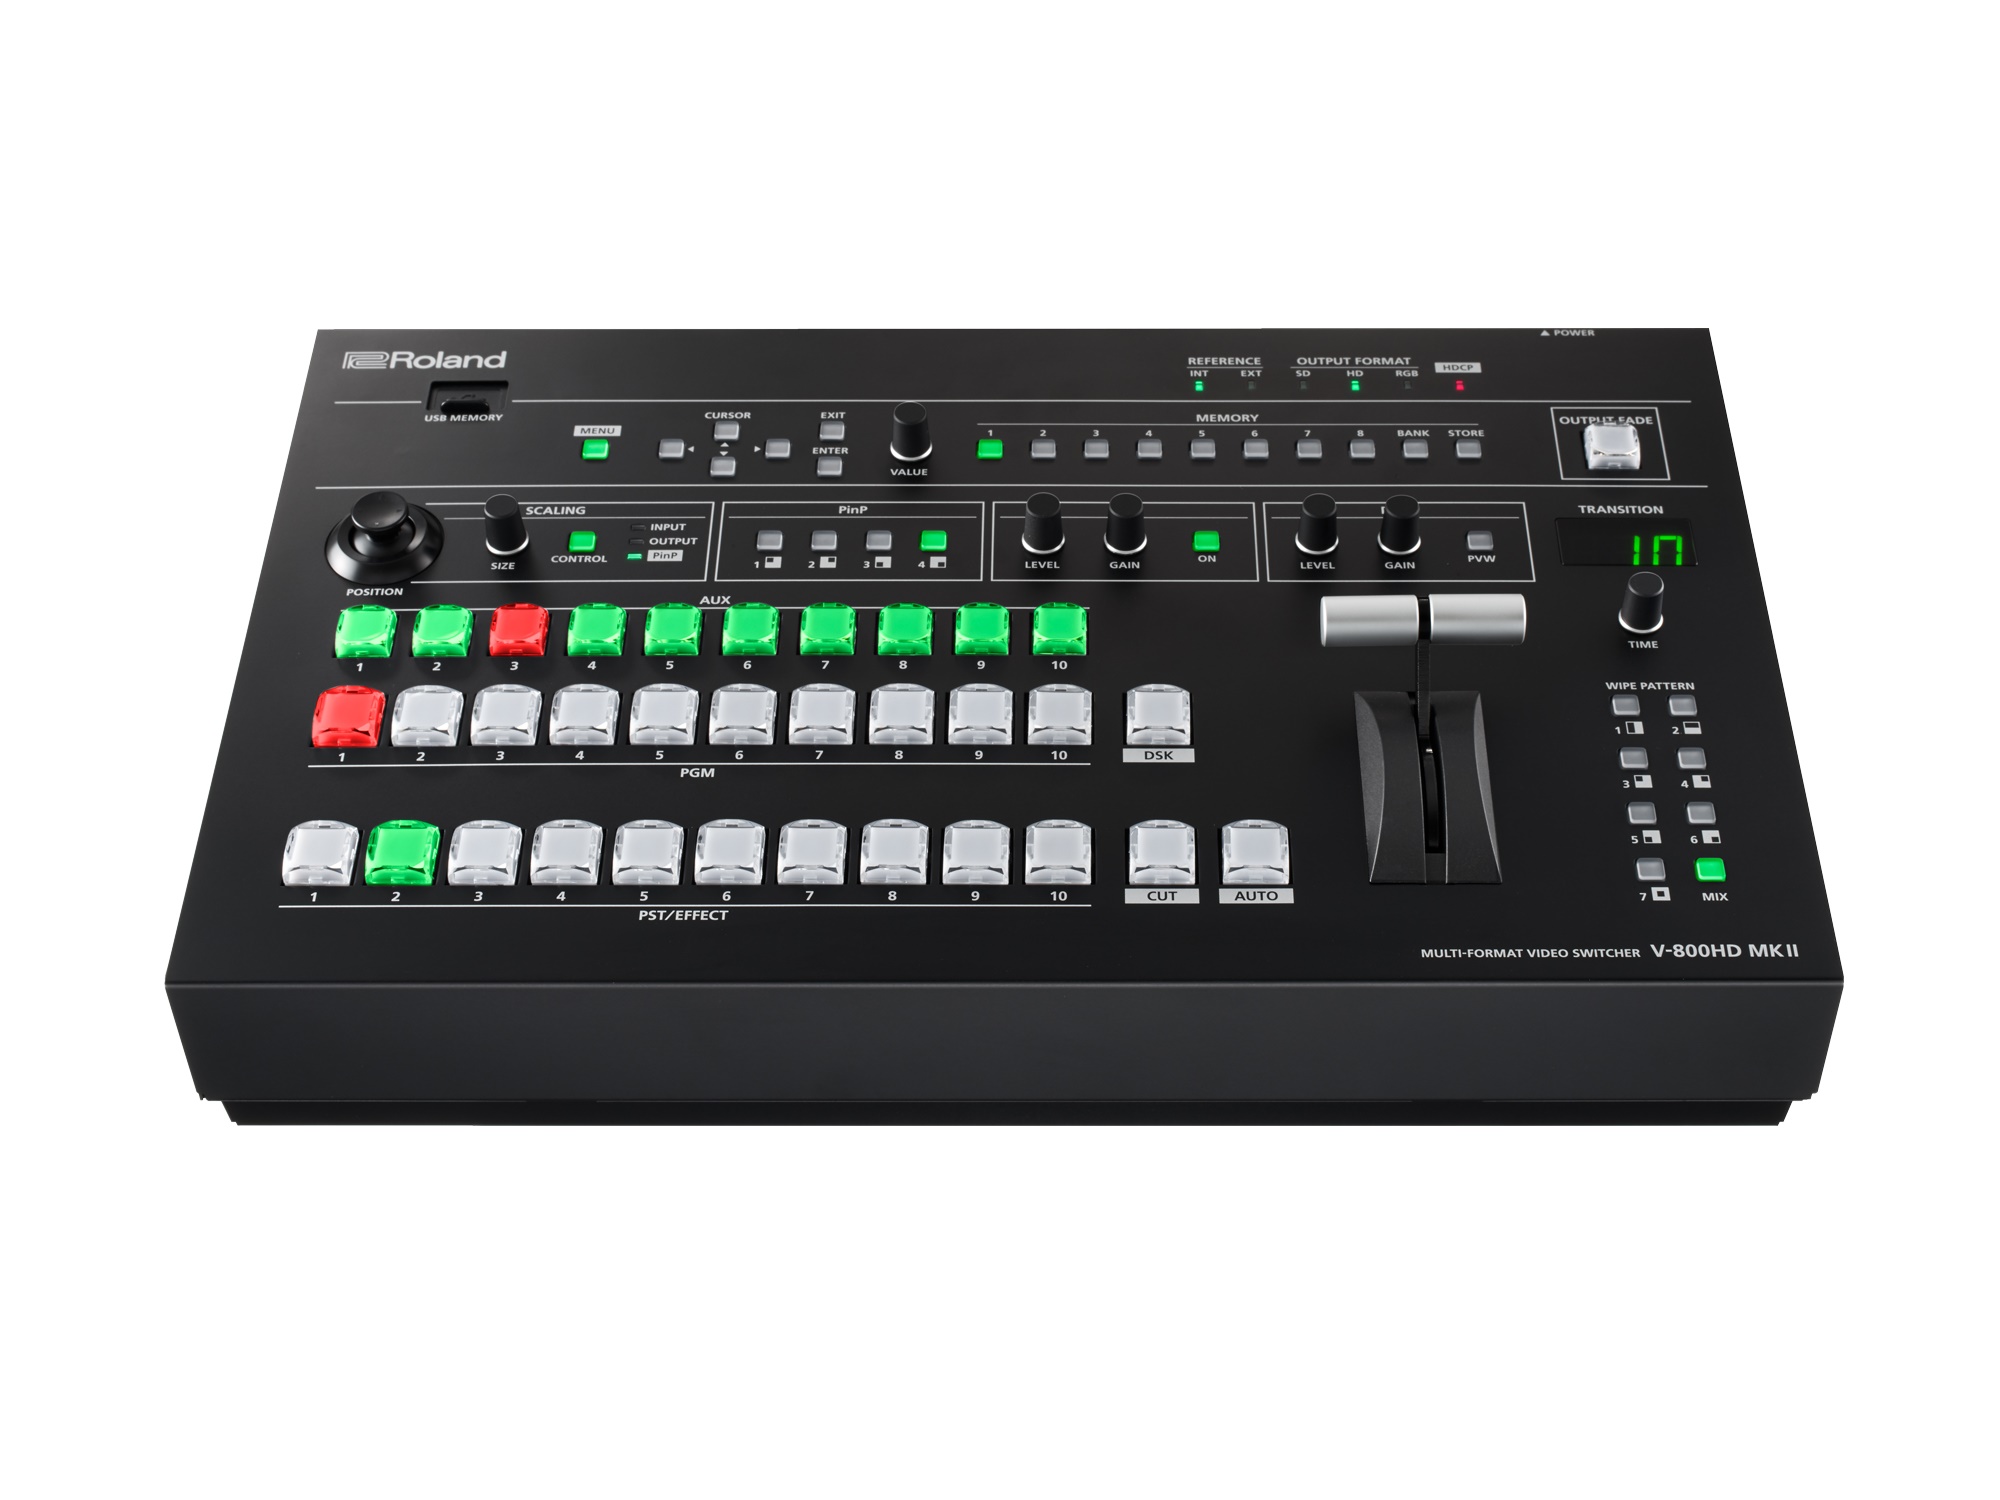 V-800HDMKII 8-Channel Multi-Format Video Switcher by Roland